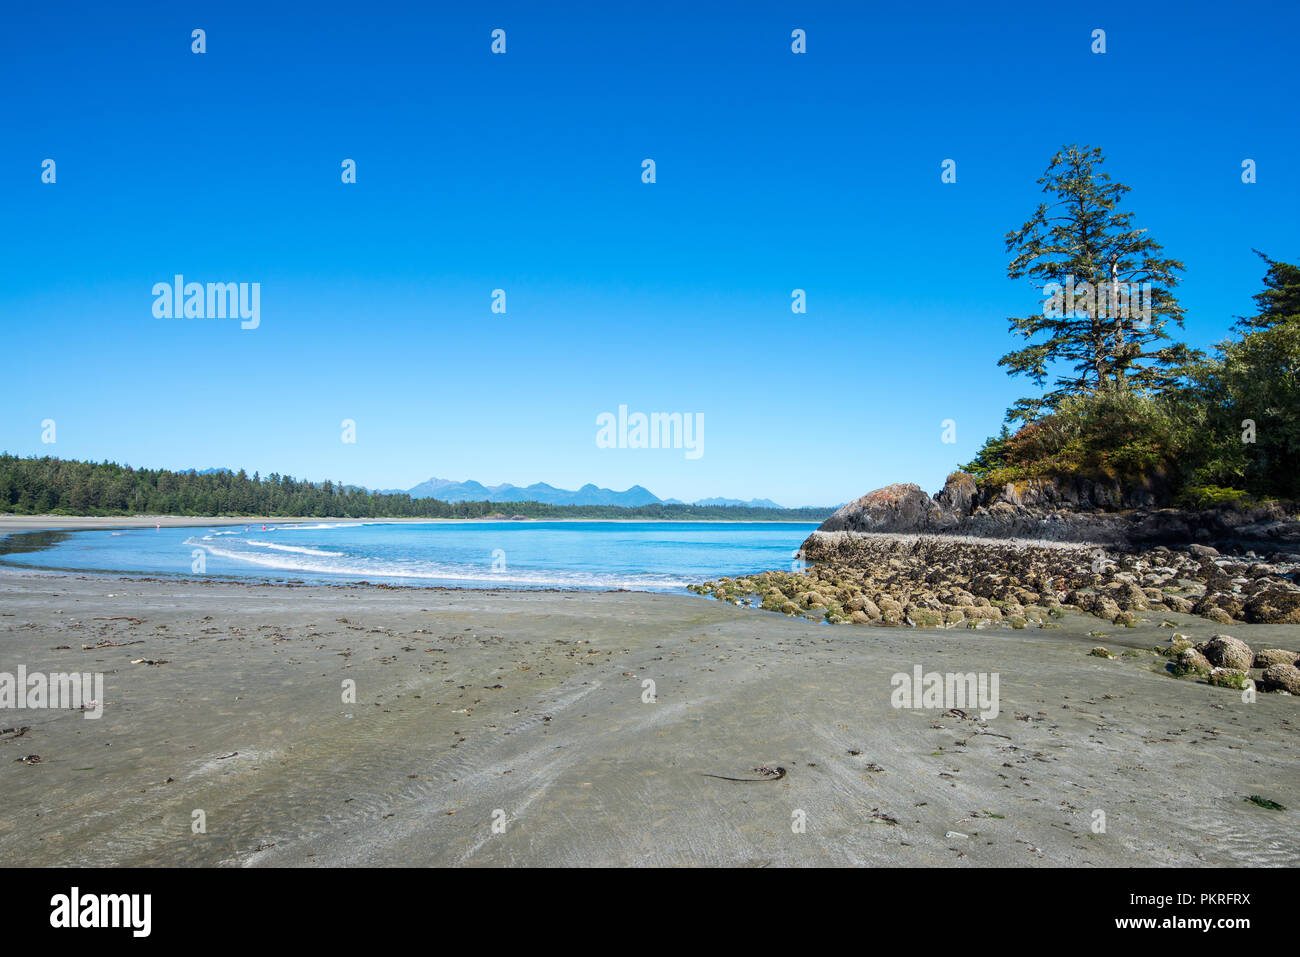 A fine and quiet  morning at Schooner Cove, Tofino, Vancouver Island Stock Photo